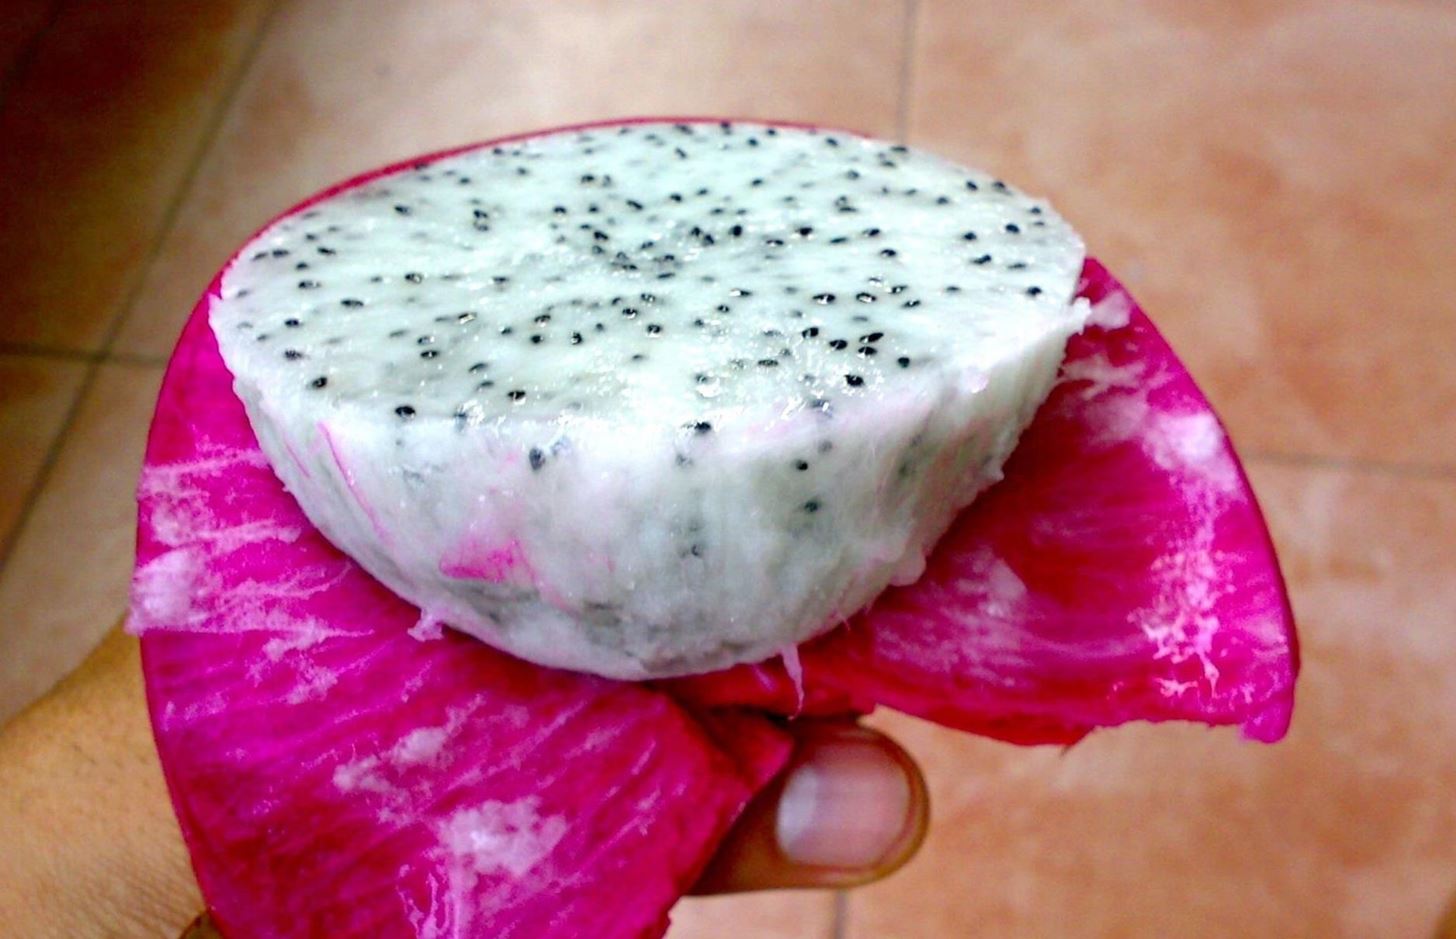 Weird Ingredient Wednesday: How to Train Your Dragonfruit